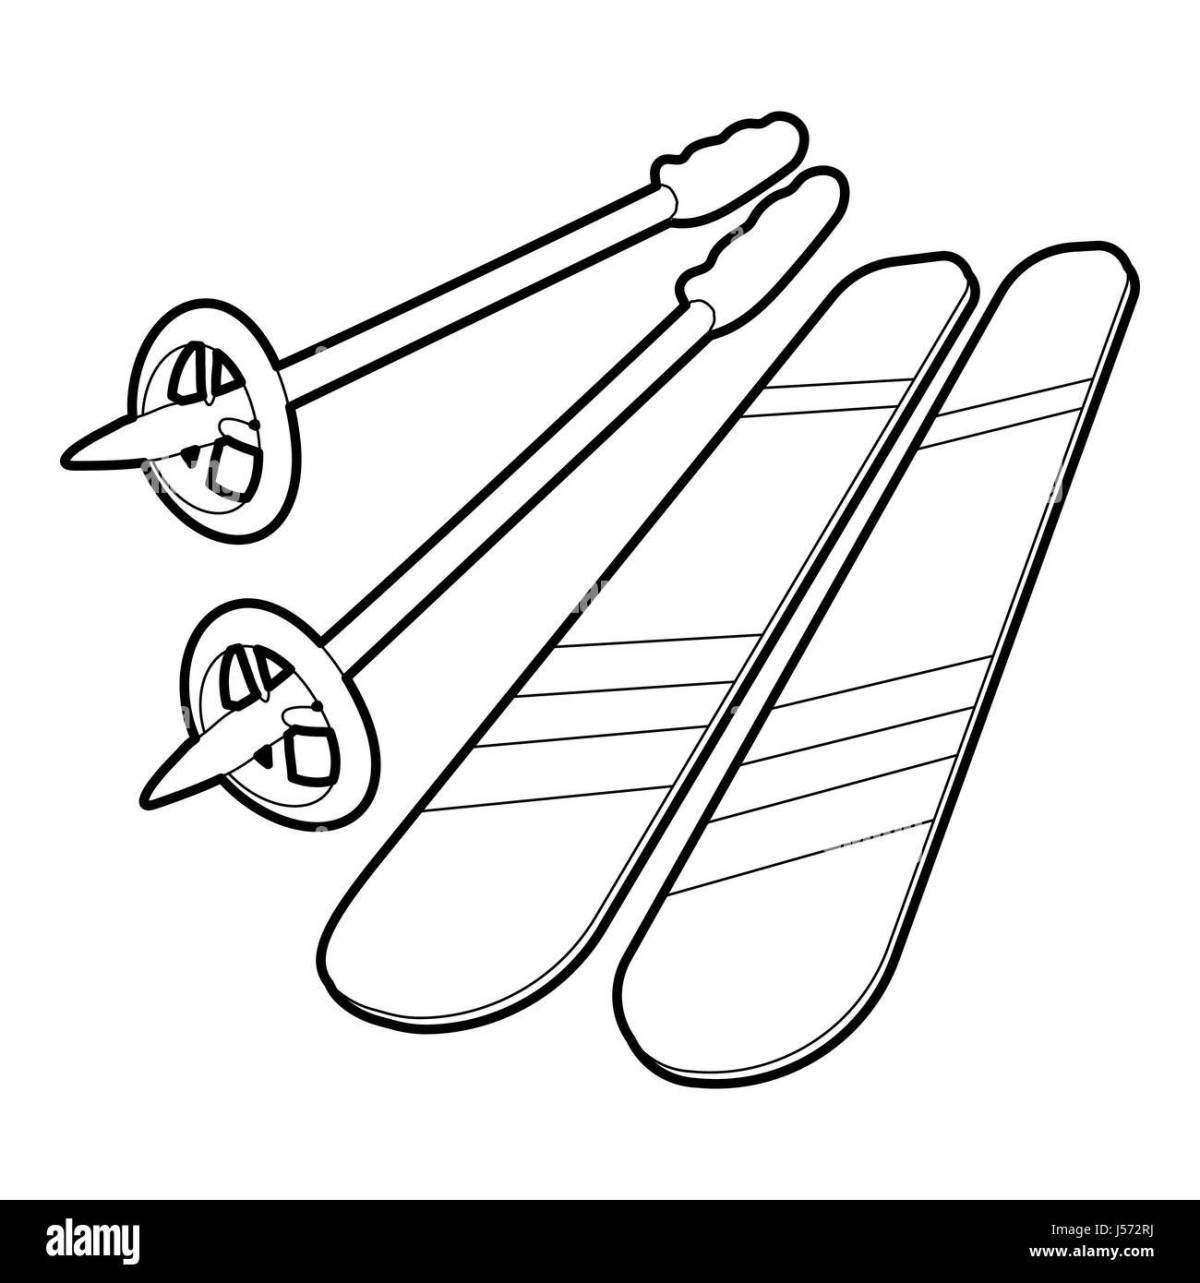 Stylish skis for 3-4 year olds